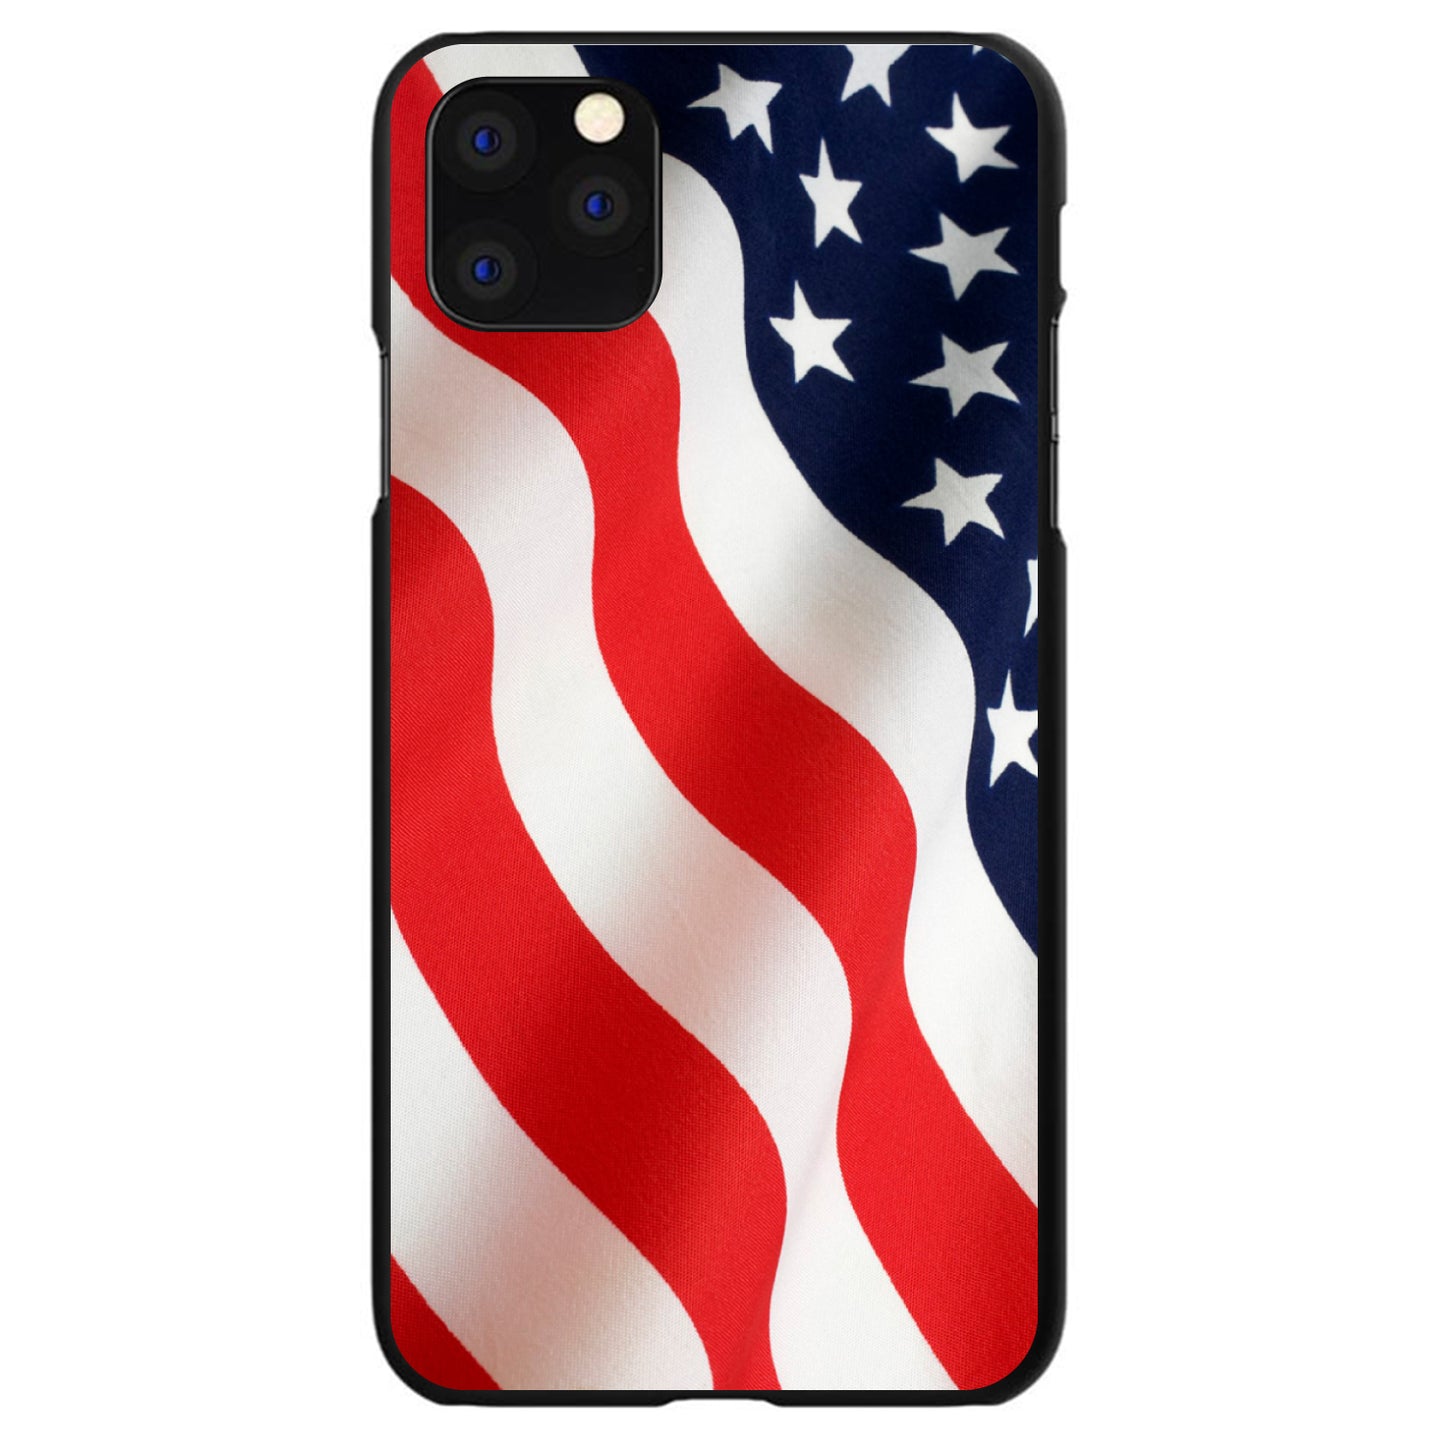 DistinctInk® Hard Plastic Snap-On Case for Apple iPhone or Samsung Galaxy - Red White Blue United States Flag USA